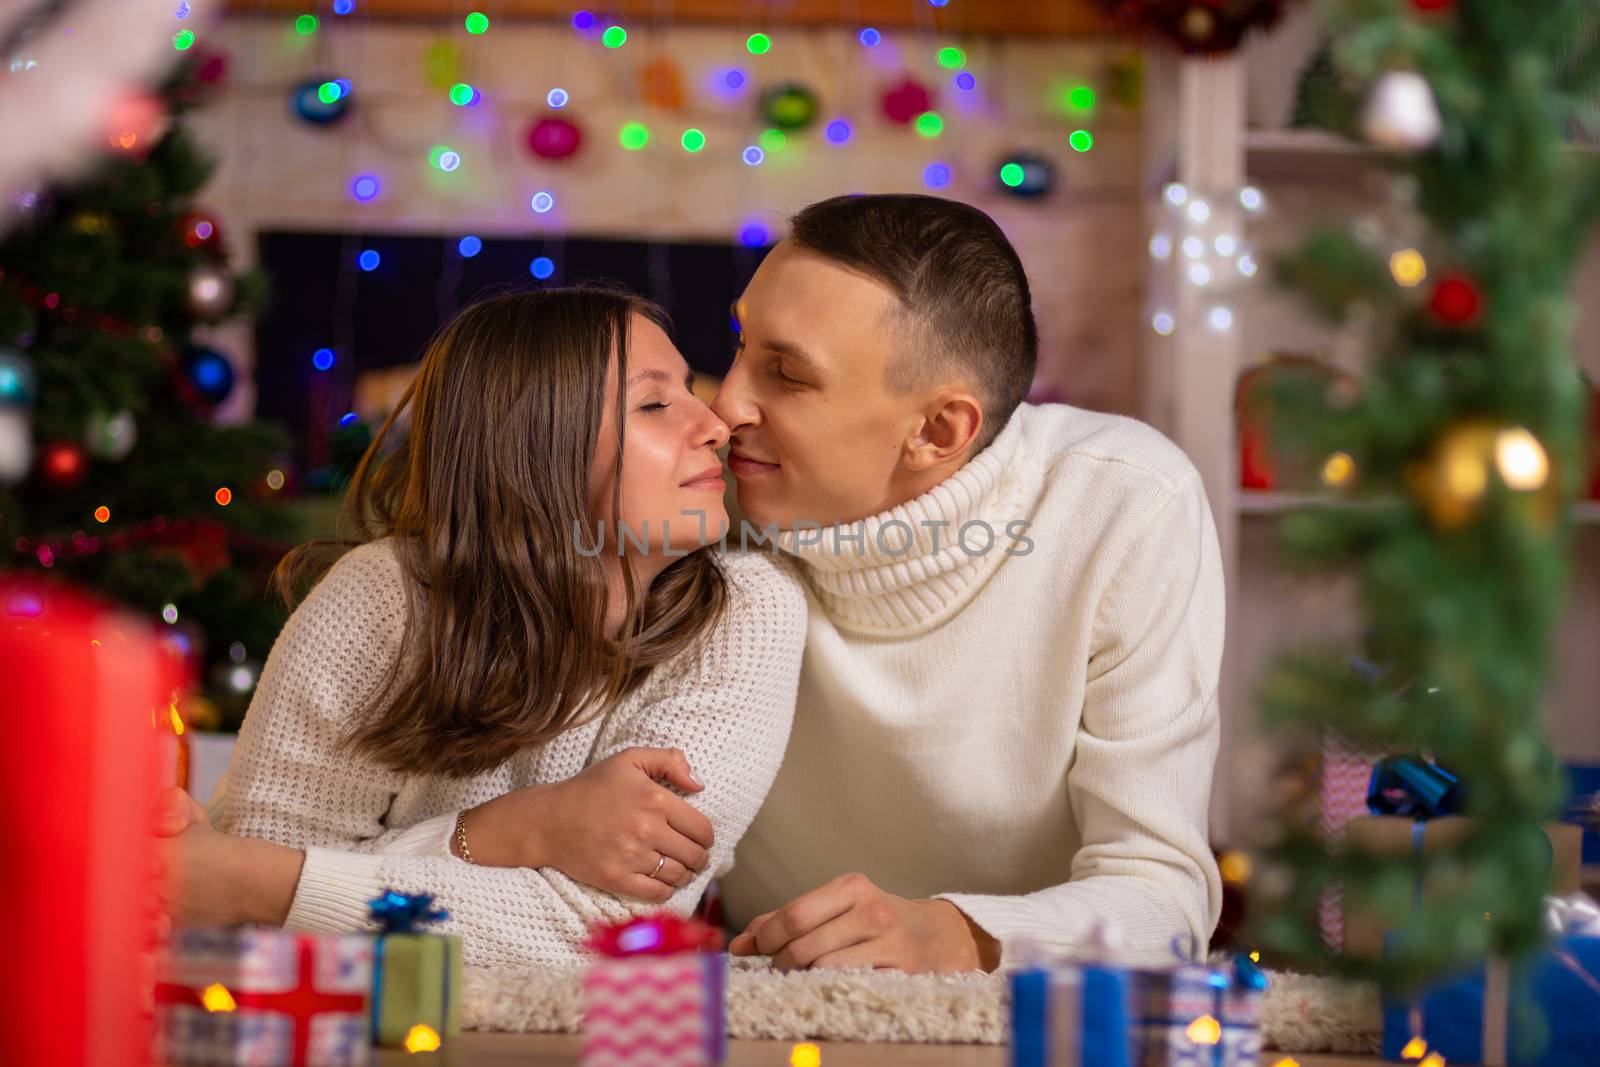 heterosexual couple hugs in a decorated room on Christmas day by Madhourse